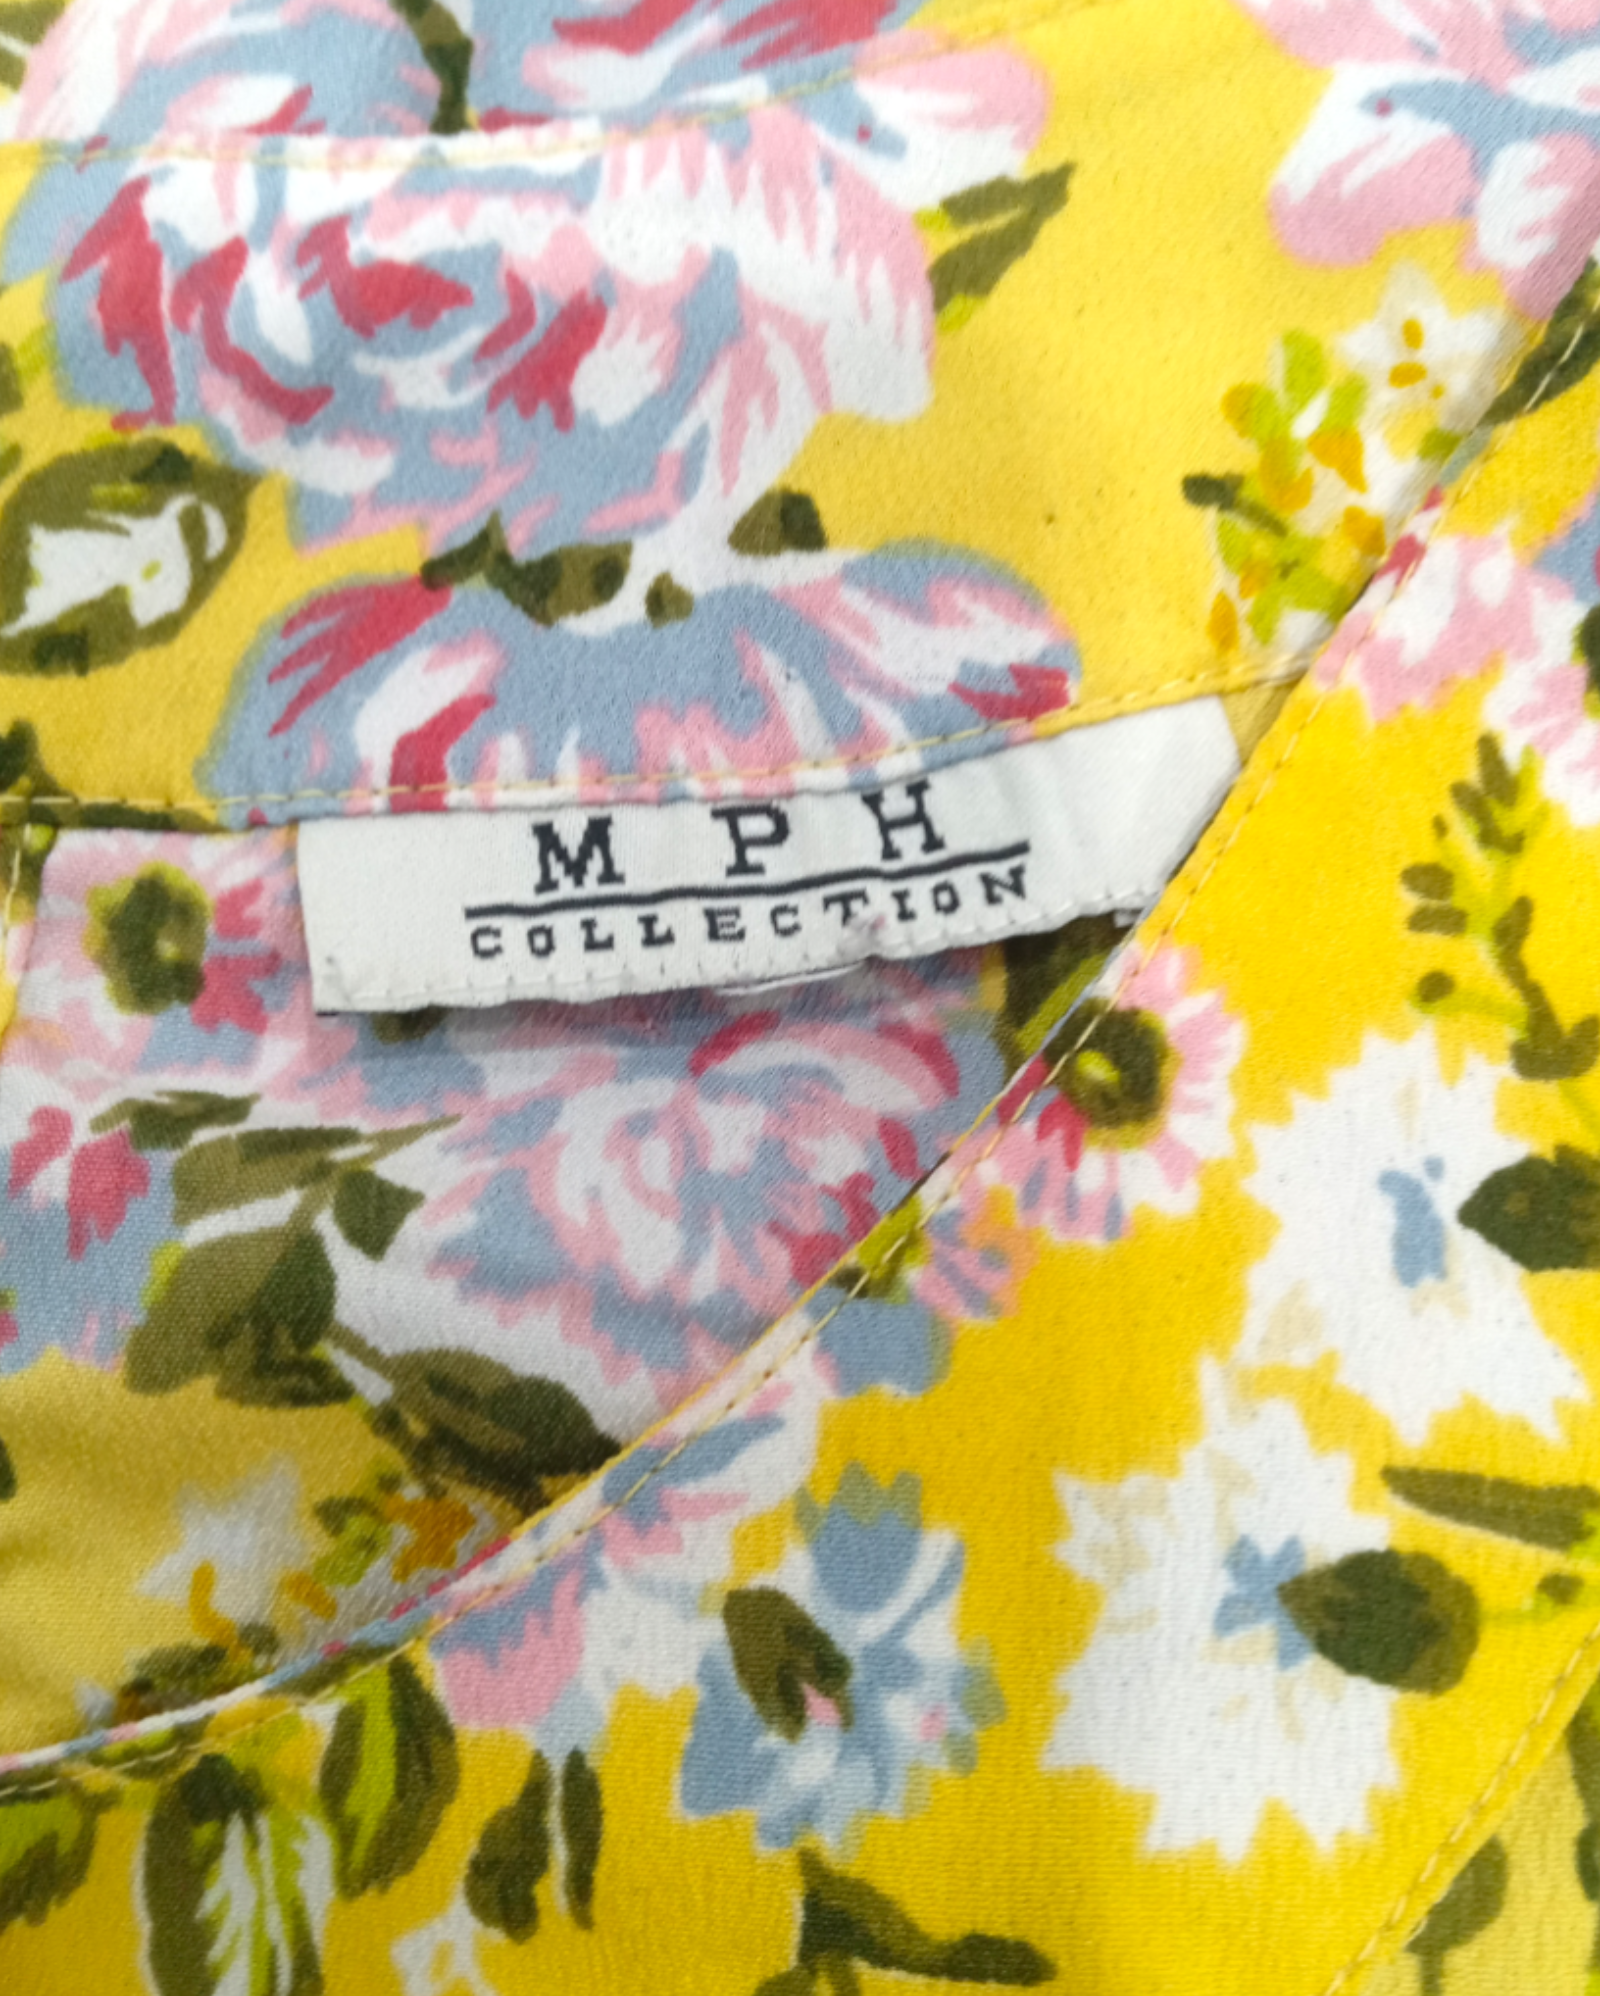 Blusas Casuales M P H collection 